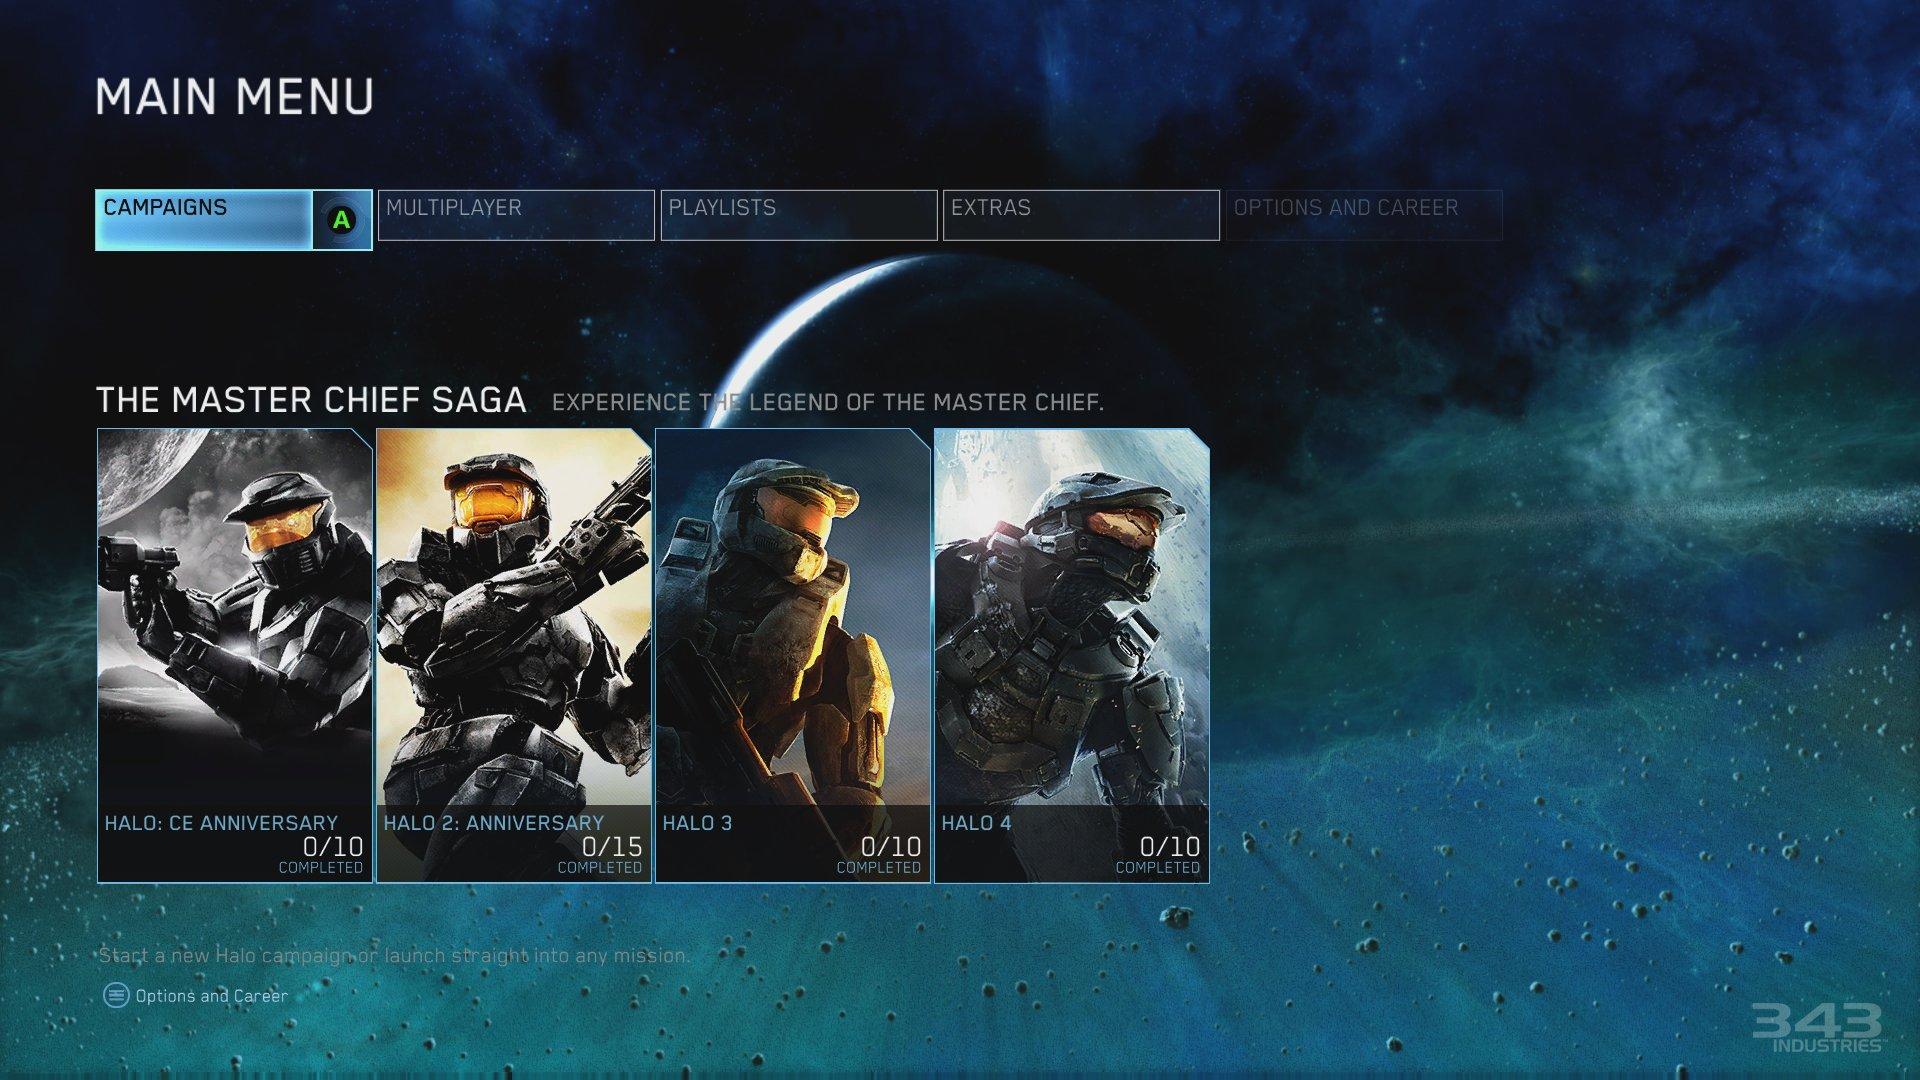 master chief collection digital